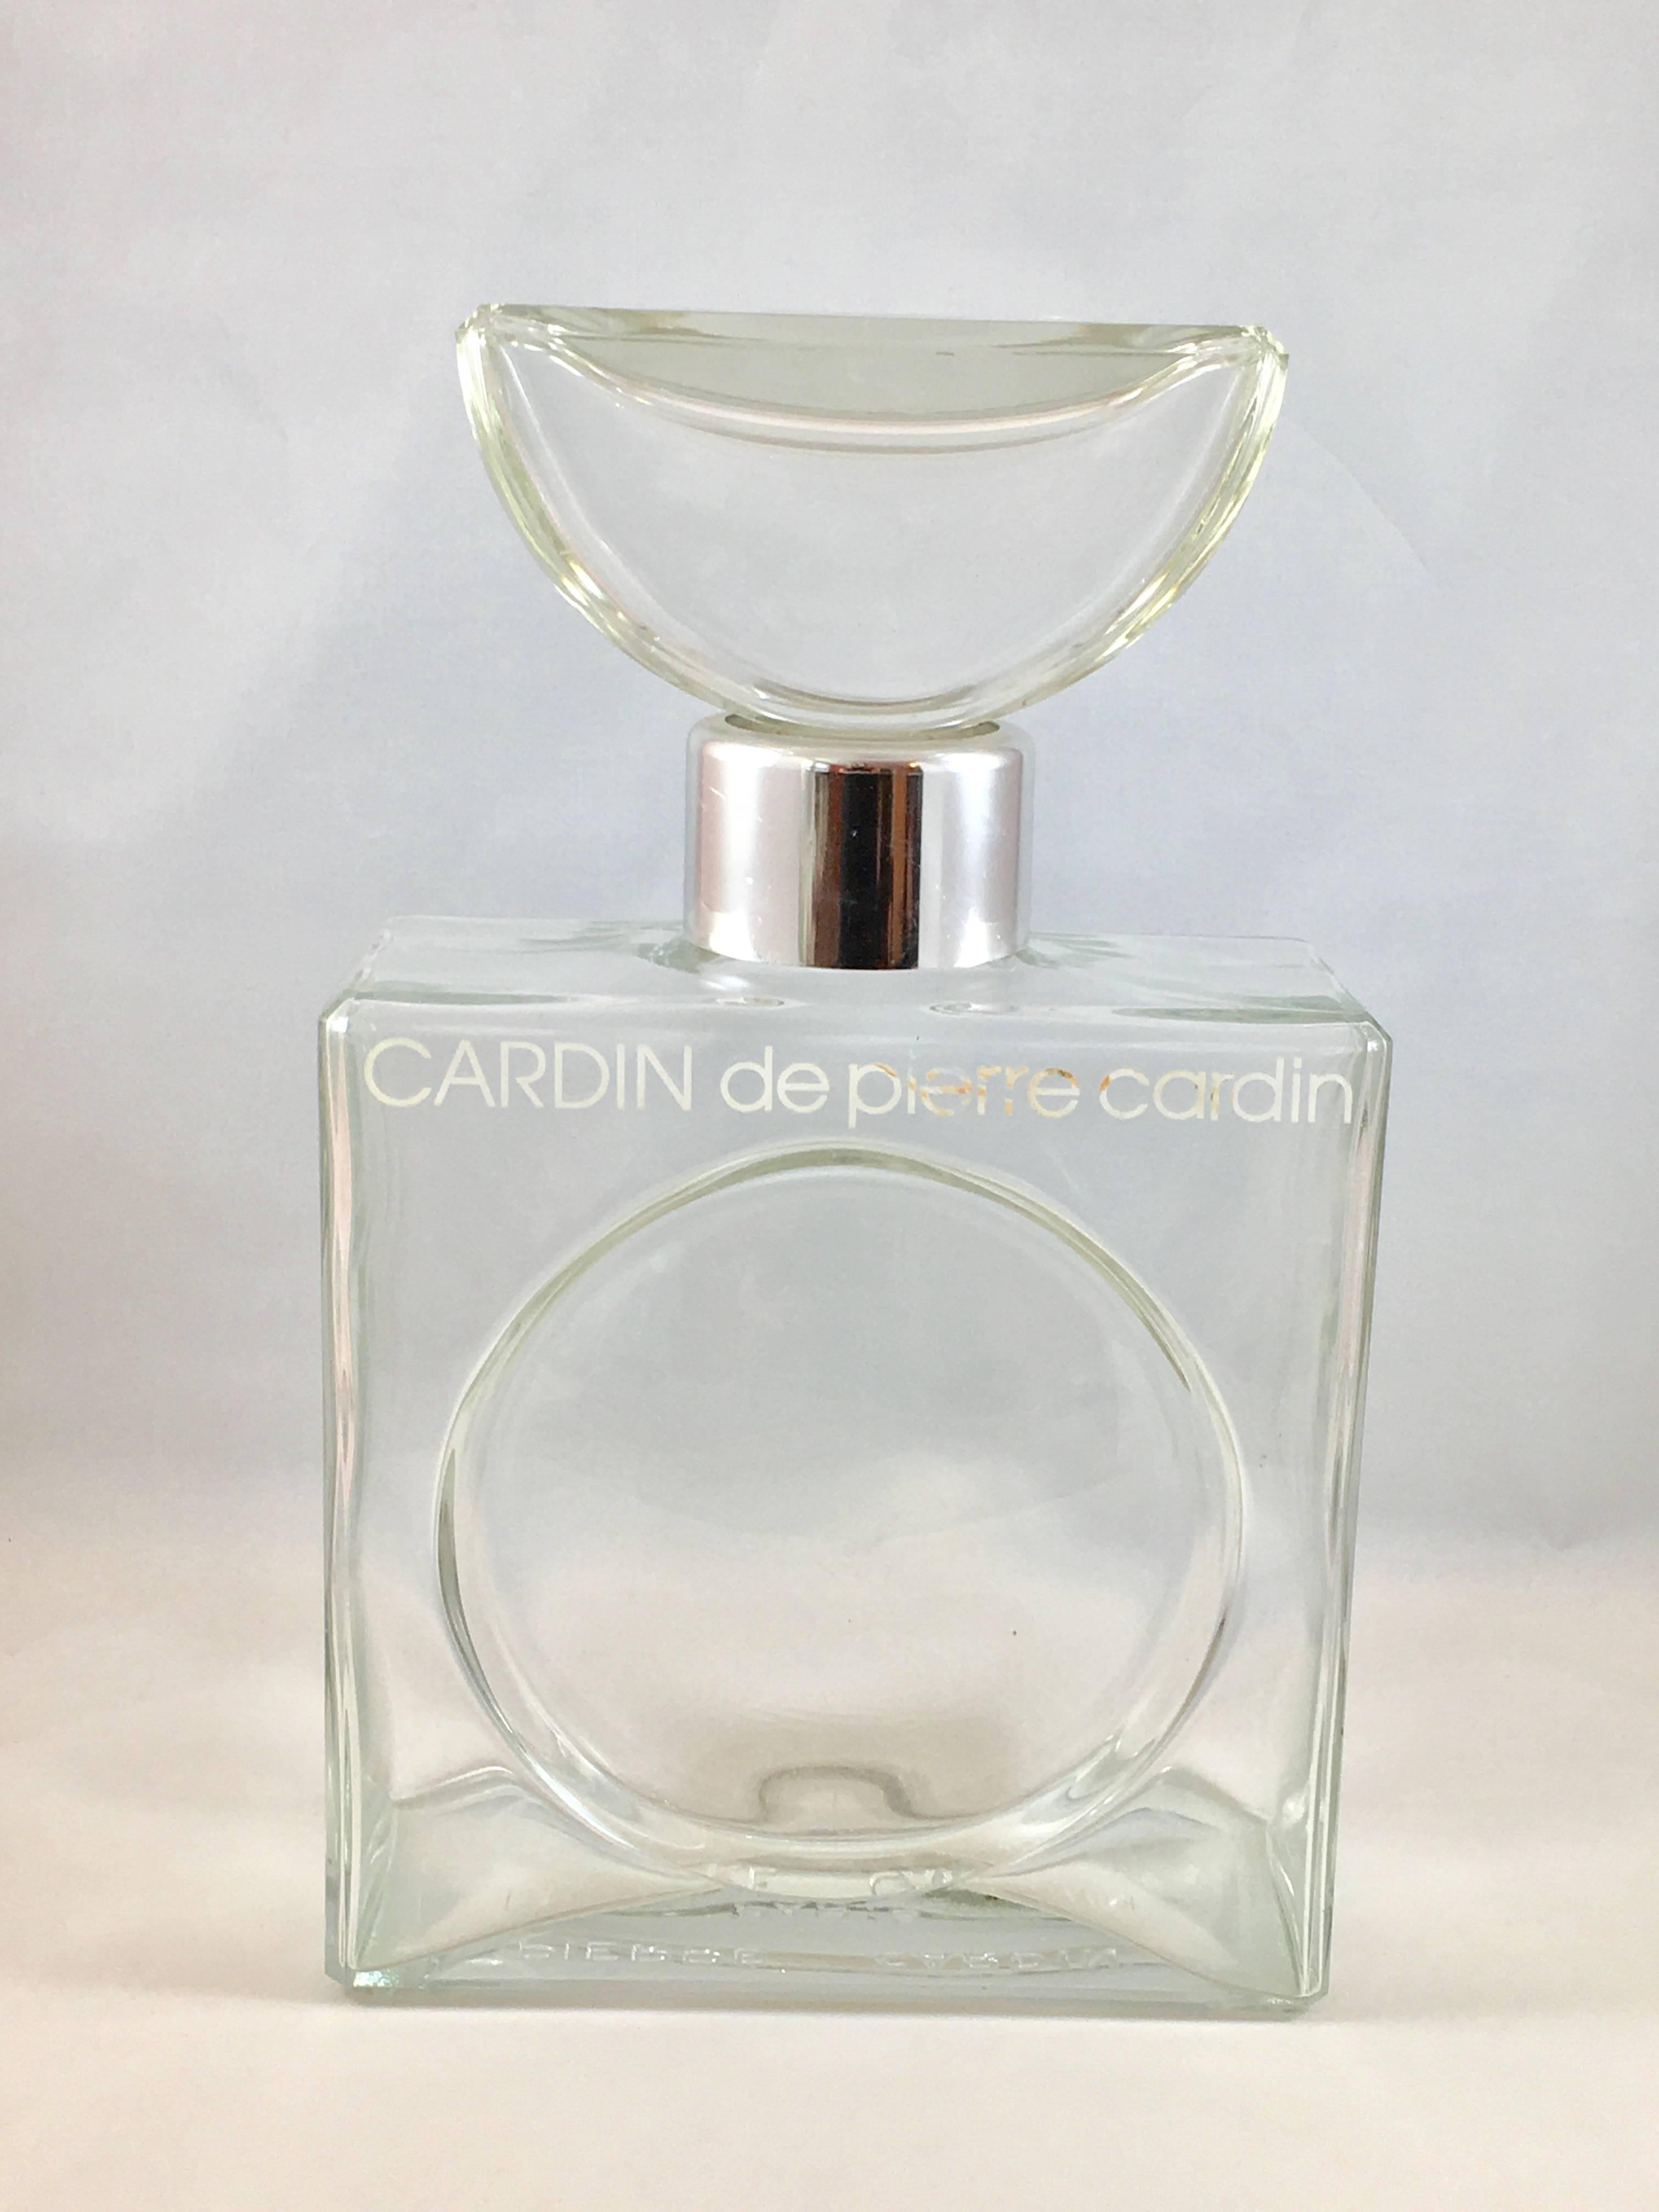 This is a huge Pierre Cardin glass perfume display bottle for a perfume called, 'Cardin'. Cardin was the first fragrance to be produced by Pierre Cardin. It was launched in 1976. 

The bottle has 'Cardin de Pierre Cardin' stenciled in white on the